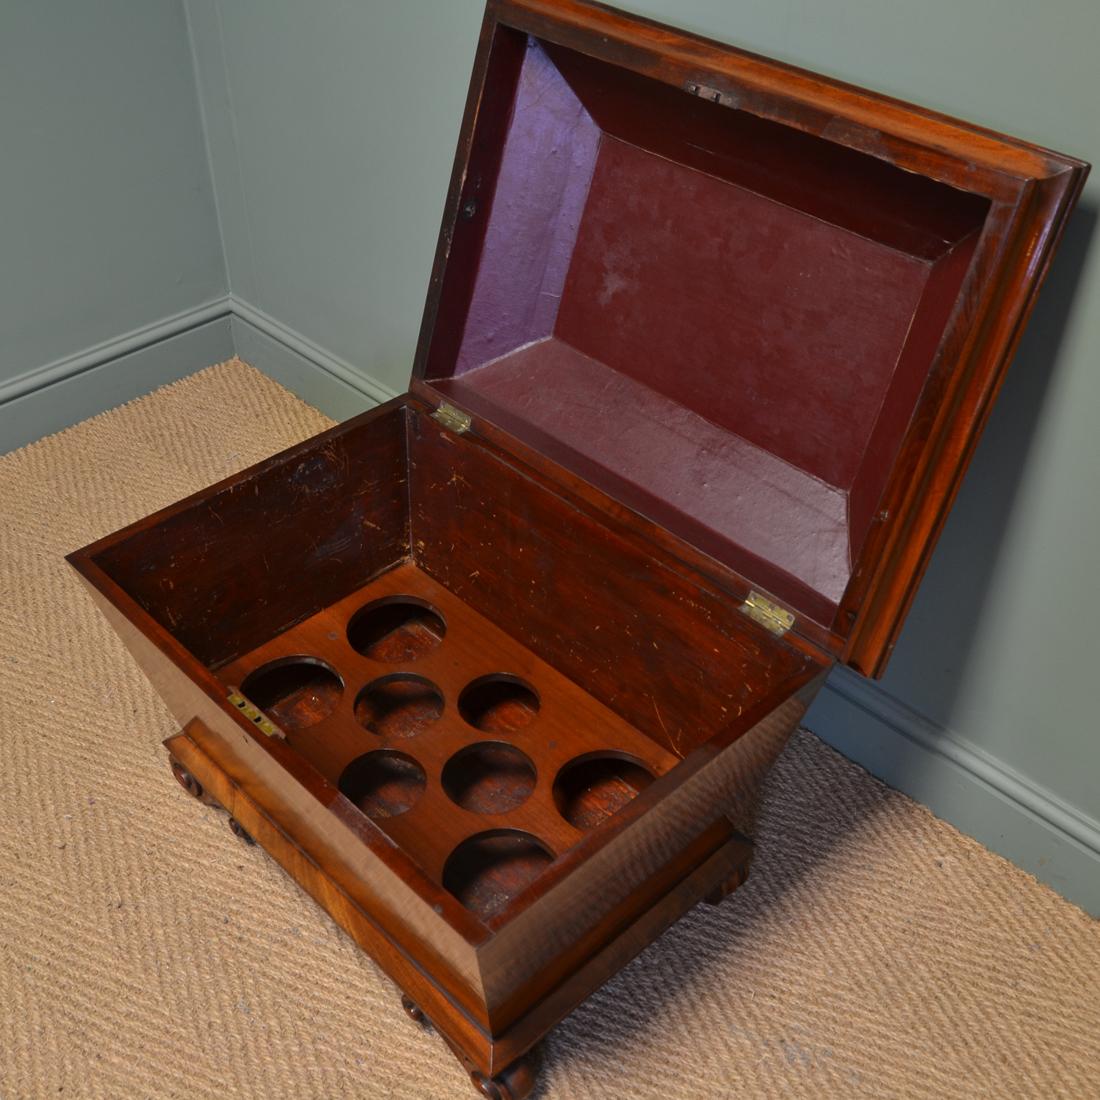 Rare Regency figured mahogany large antique cellaret / wine box

This rare regency antique cellaret / wine box, circa 1830 has a moulded top on a tapering body with unusual scrolled carved feet. The lid lifts up to reveal an interior that is